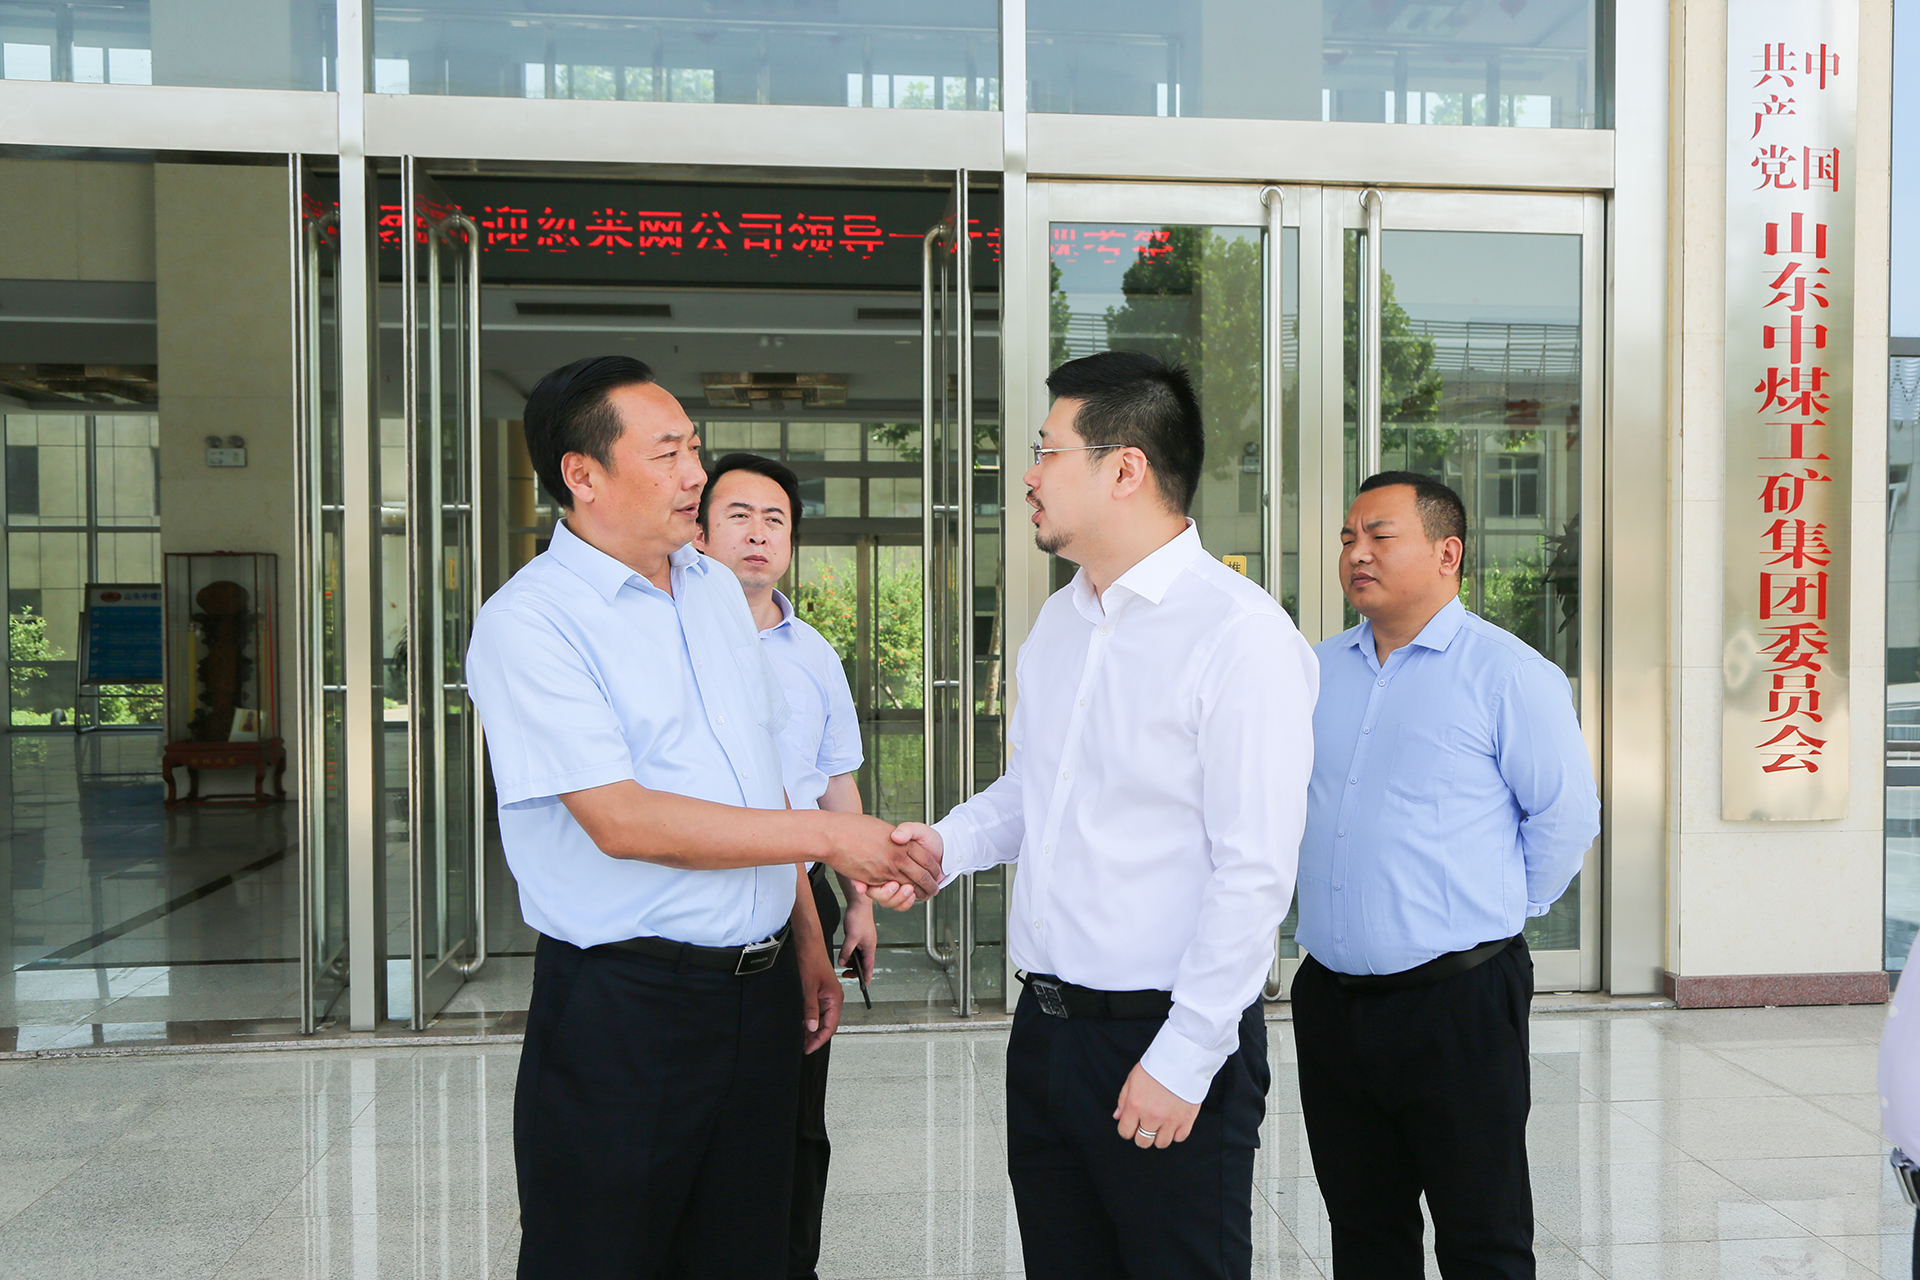 Warmly Welcome The Leader of Humi.com To Visit China Coal Group